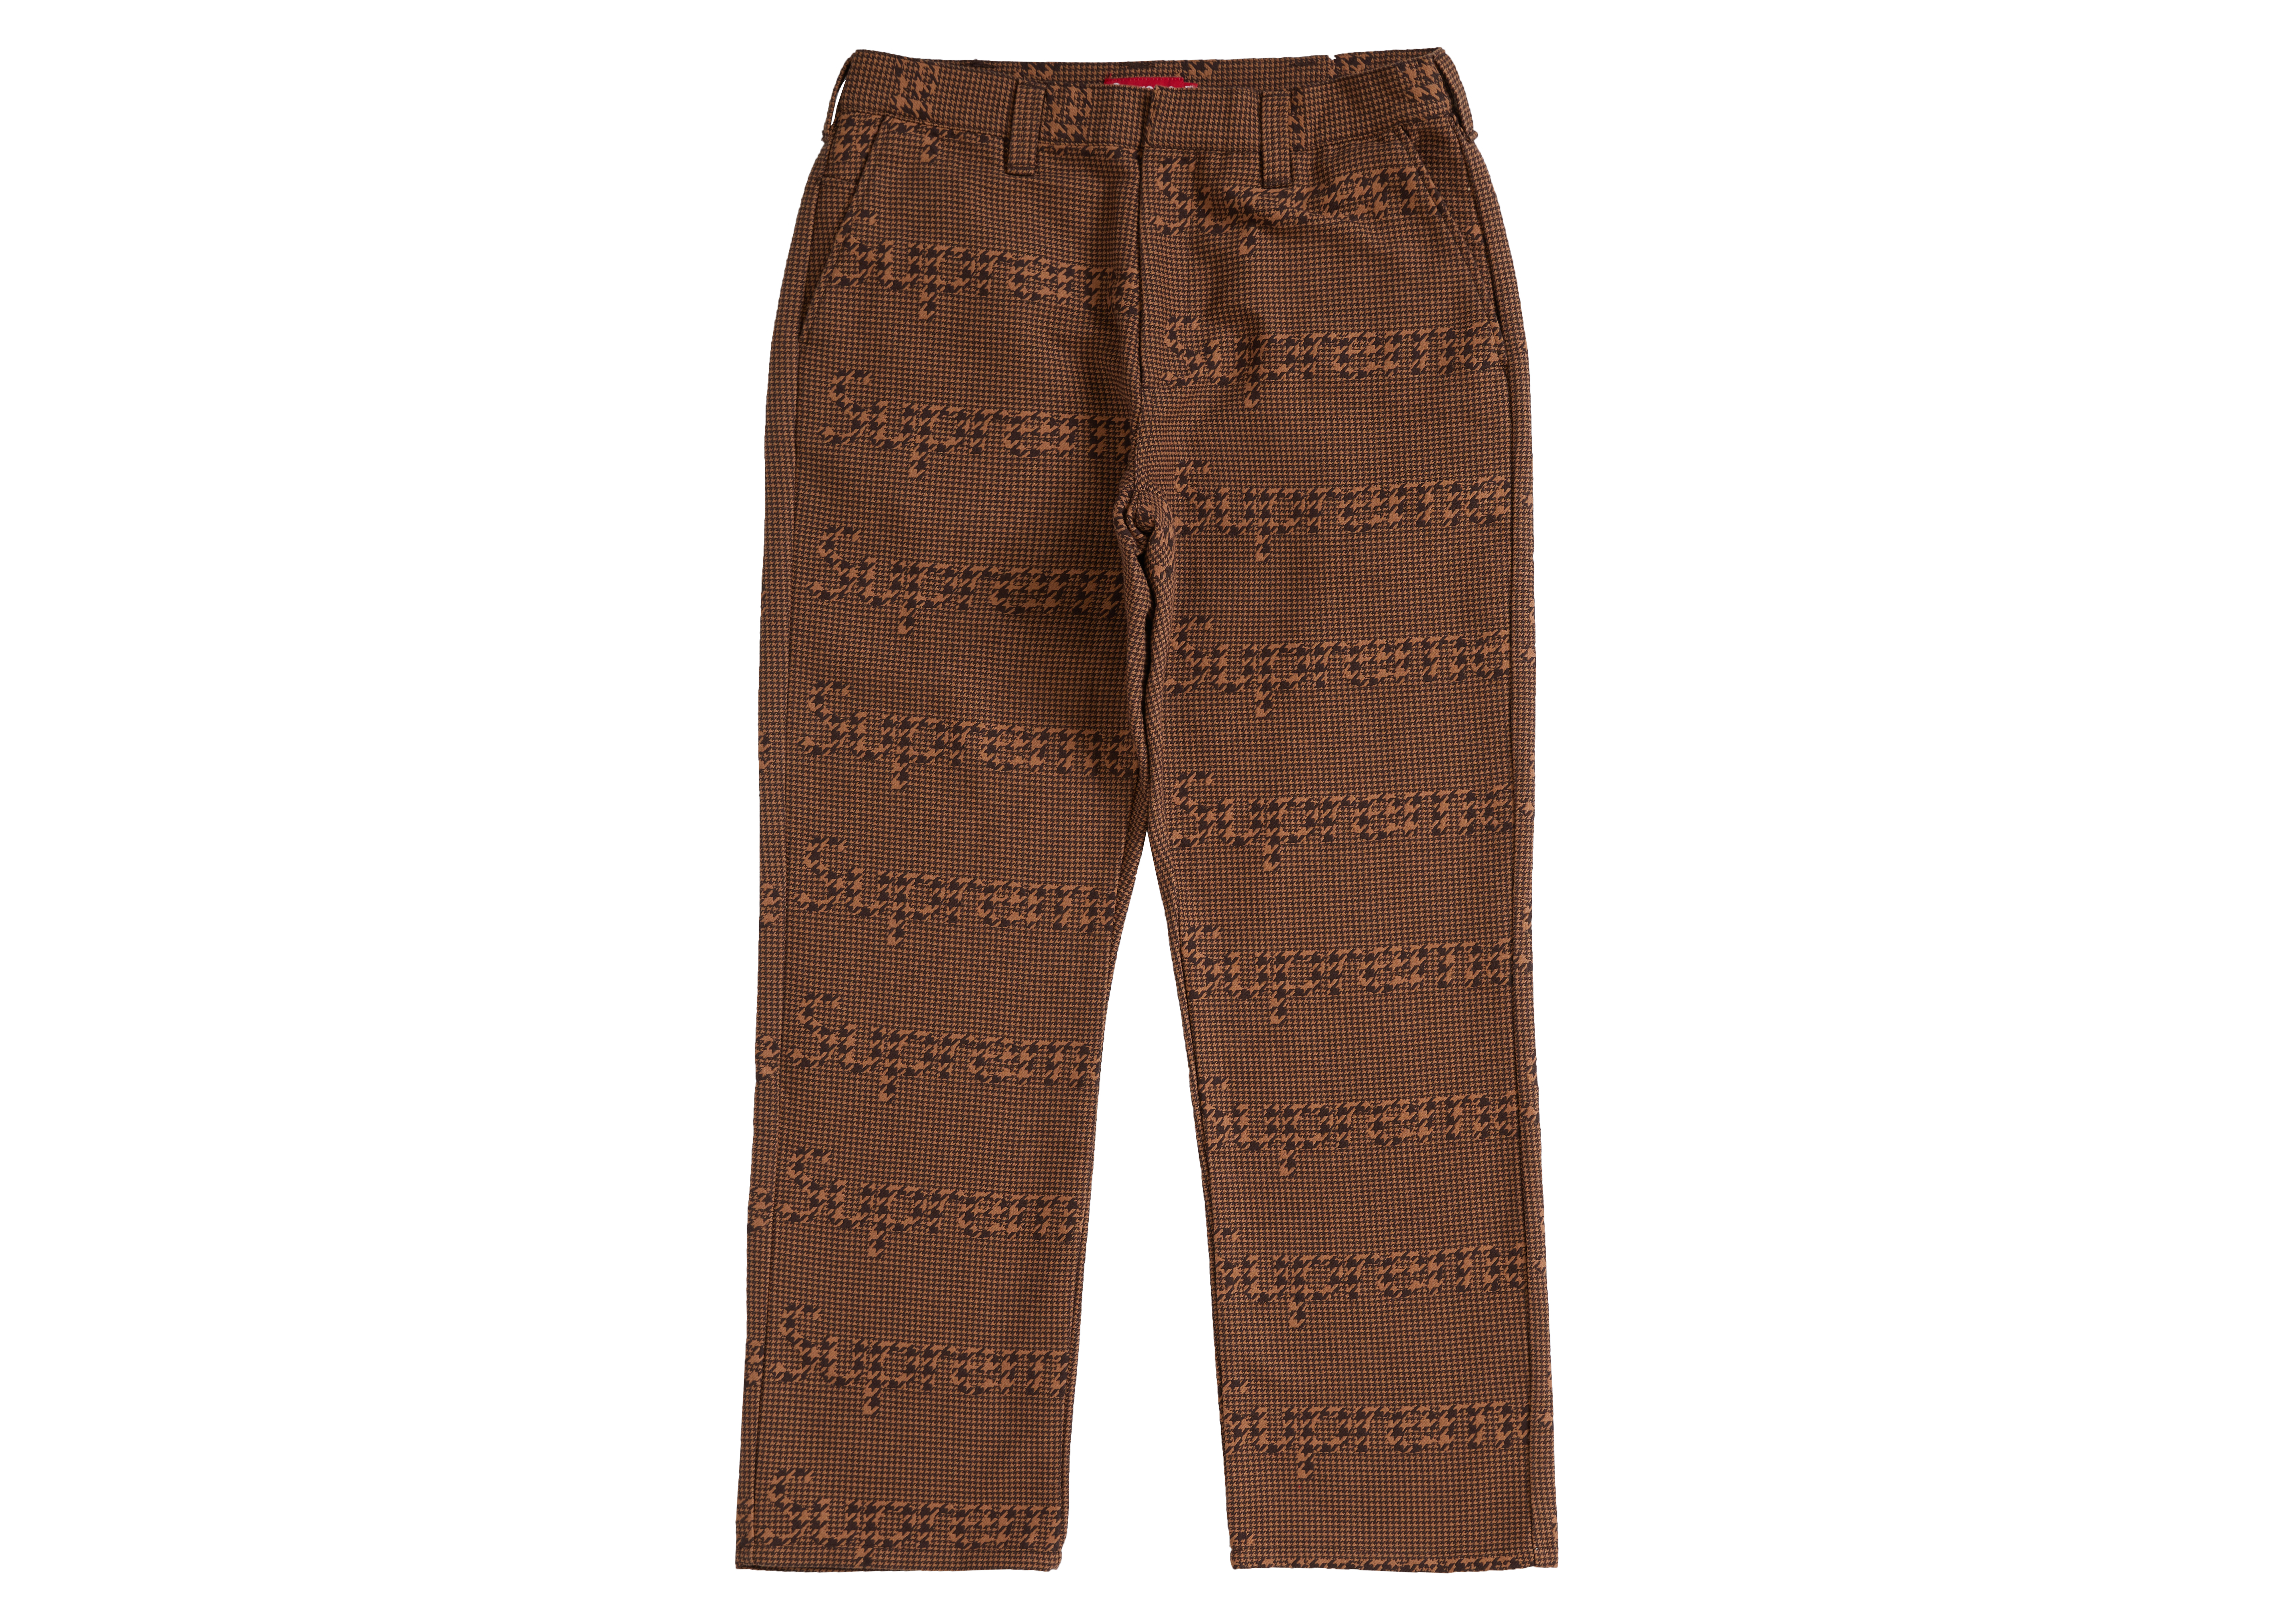 Supreme Work Pant (FW20) Brown Houndstooth Men's - FW20 - US